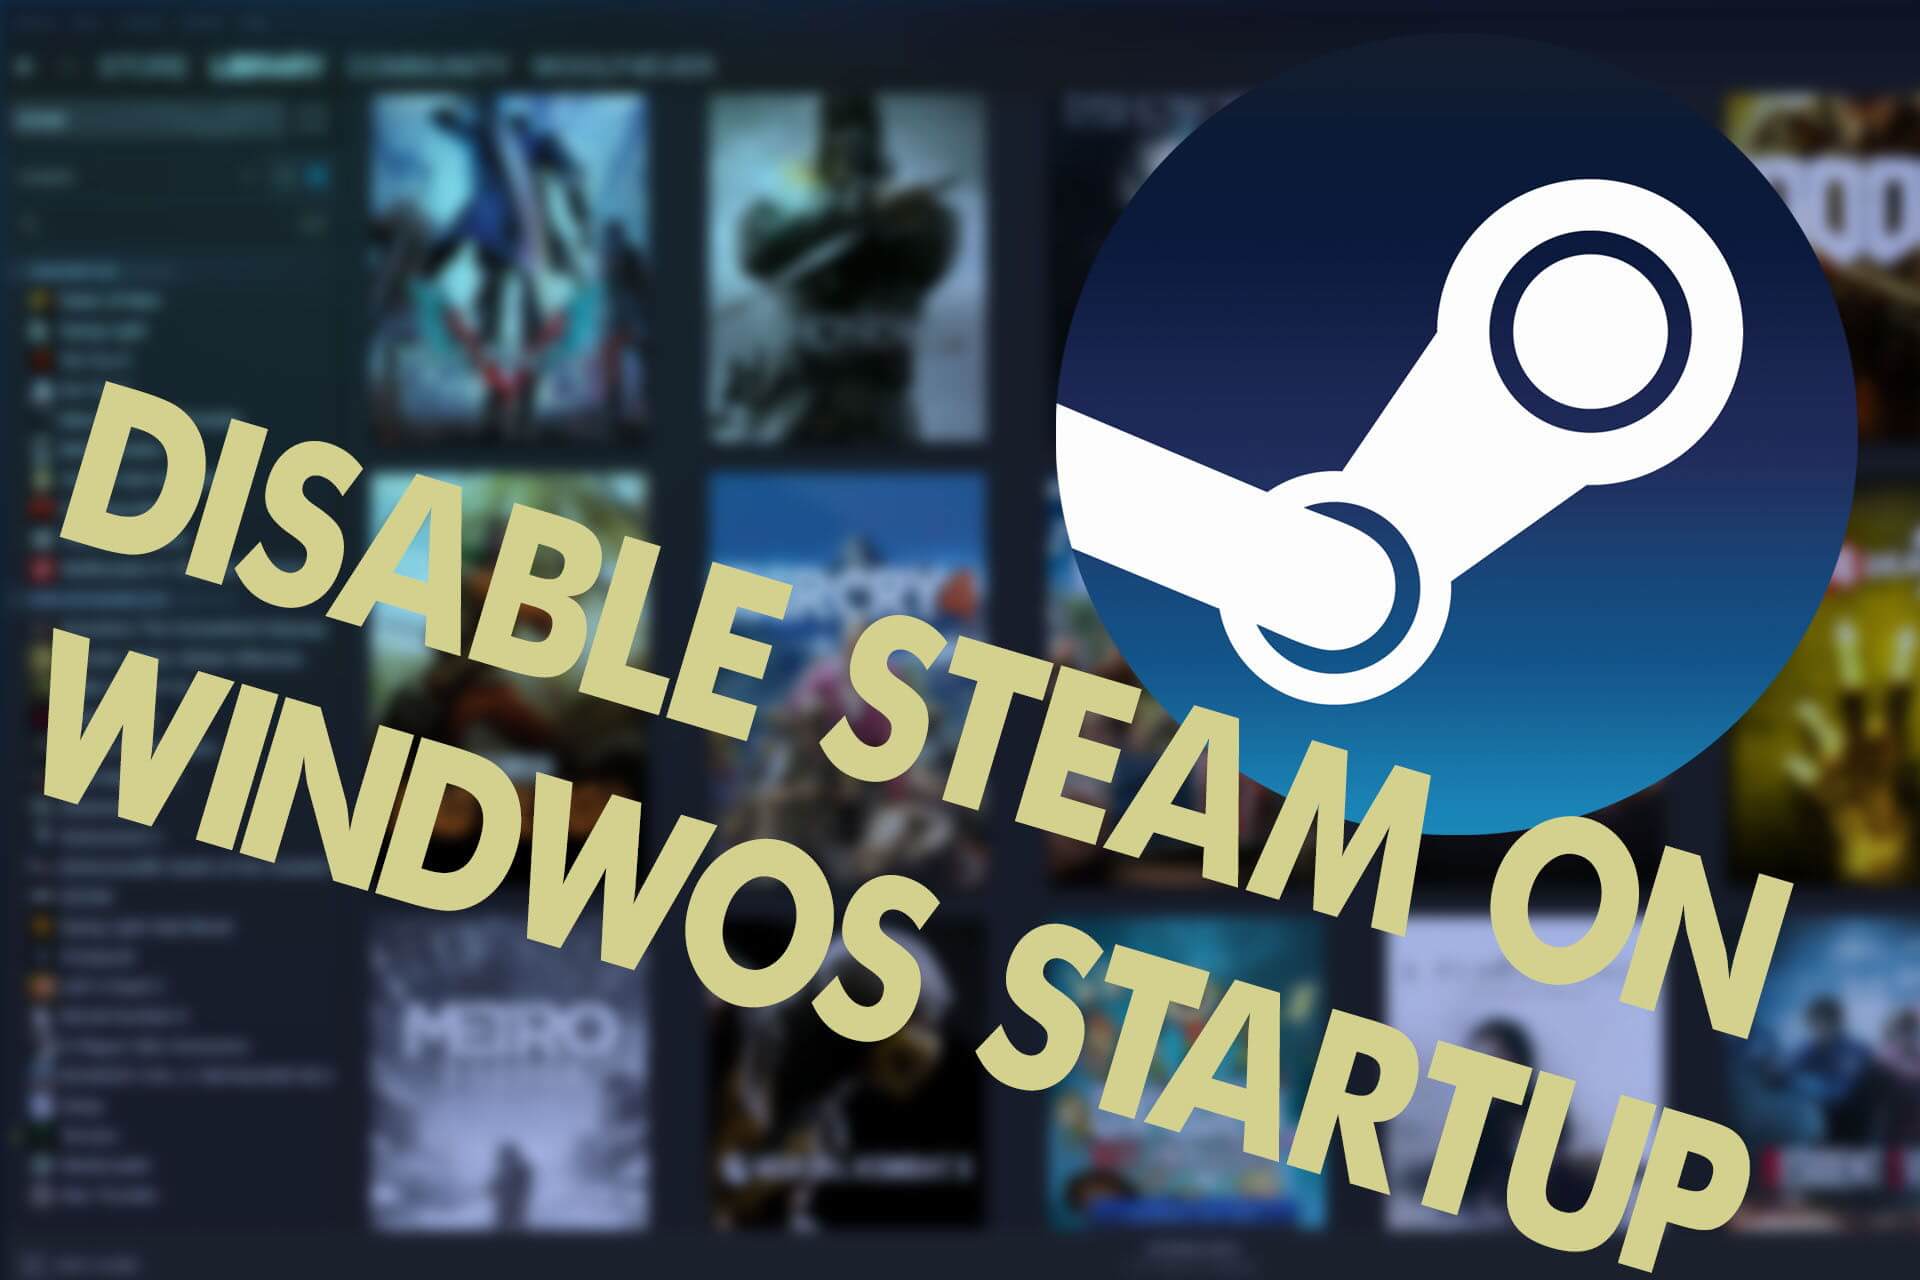 how to stop a steam workshop download